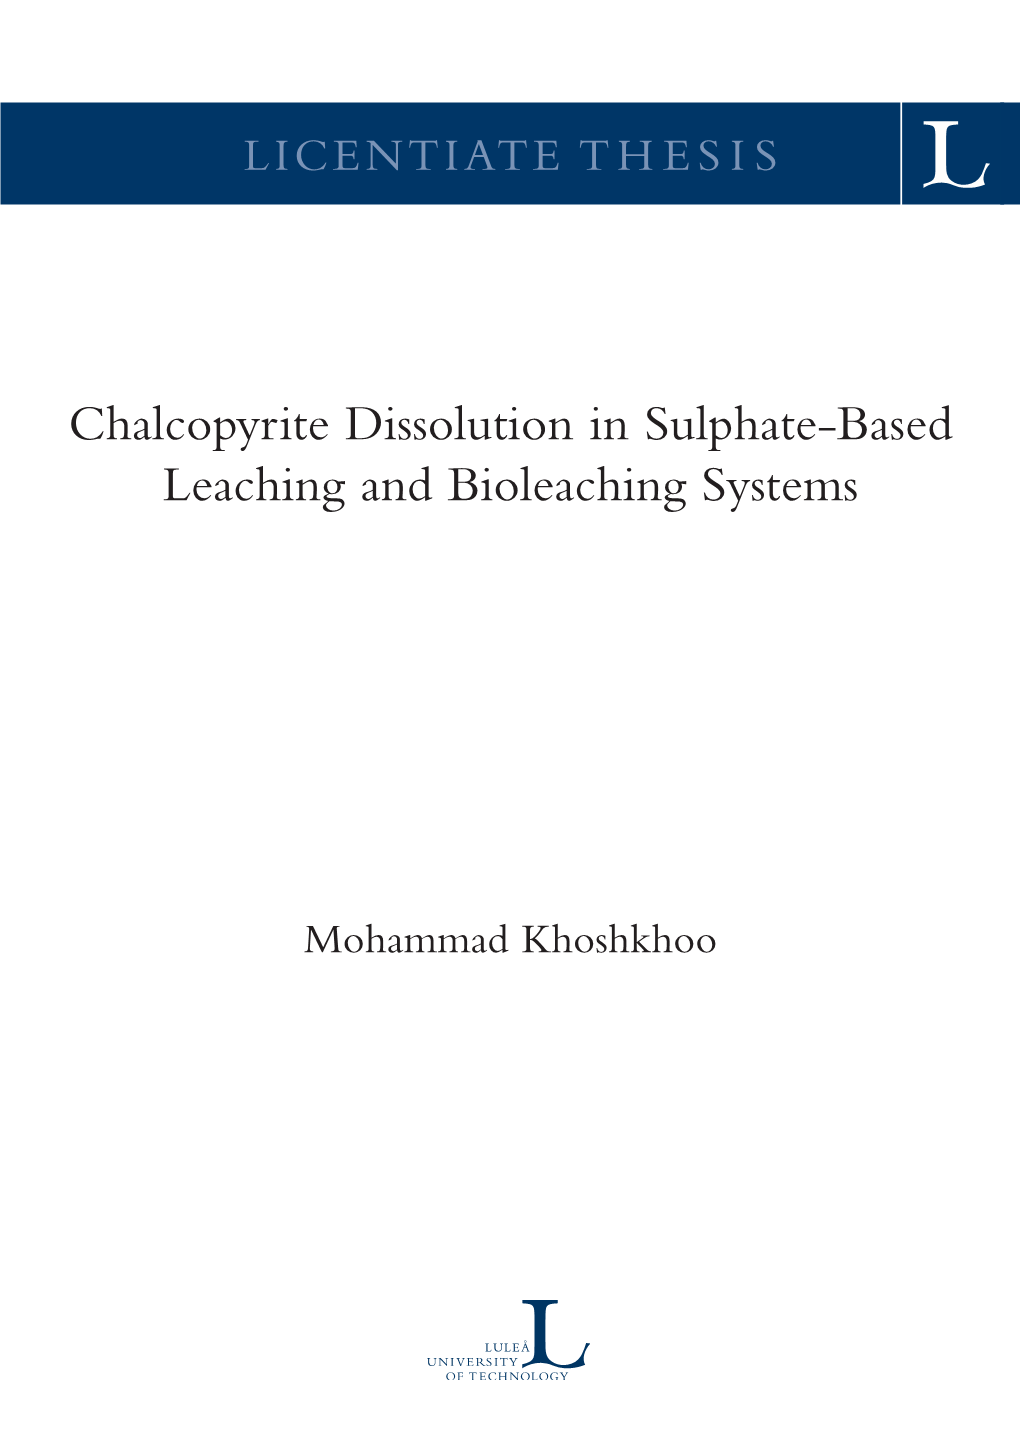 Chalcopyrite Dissolution in Sulphate-Based Leaching and Bioleaching Systems